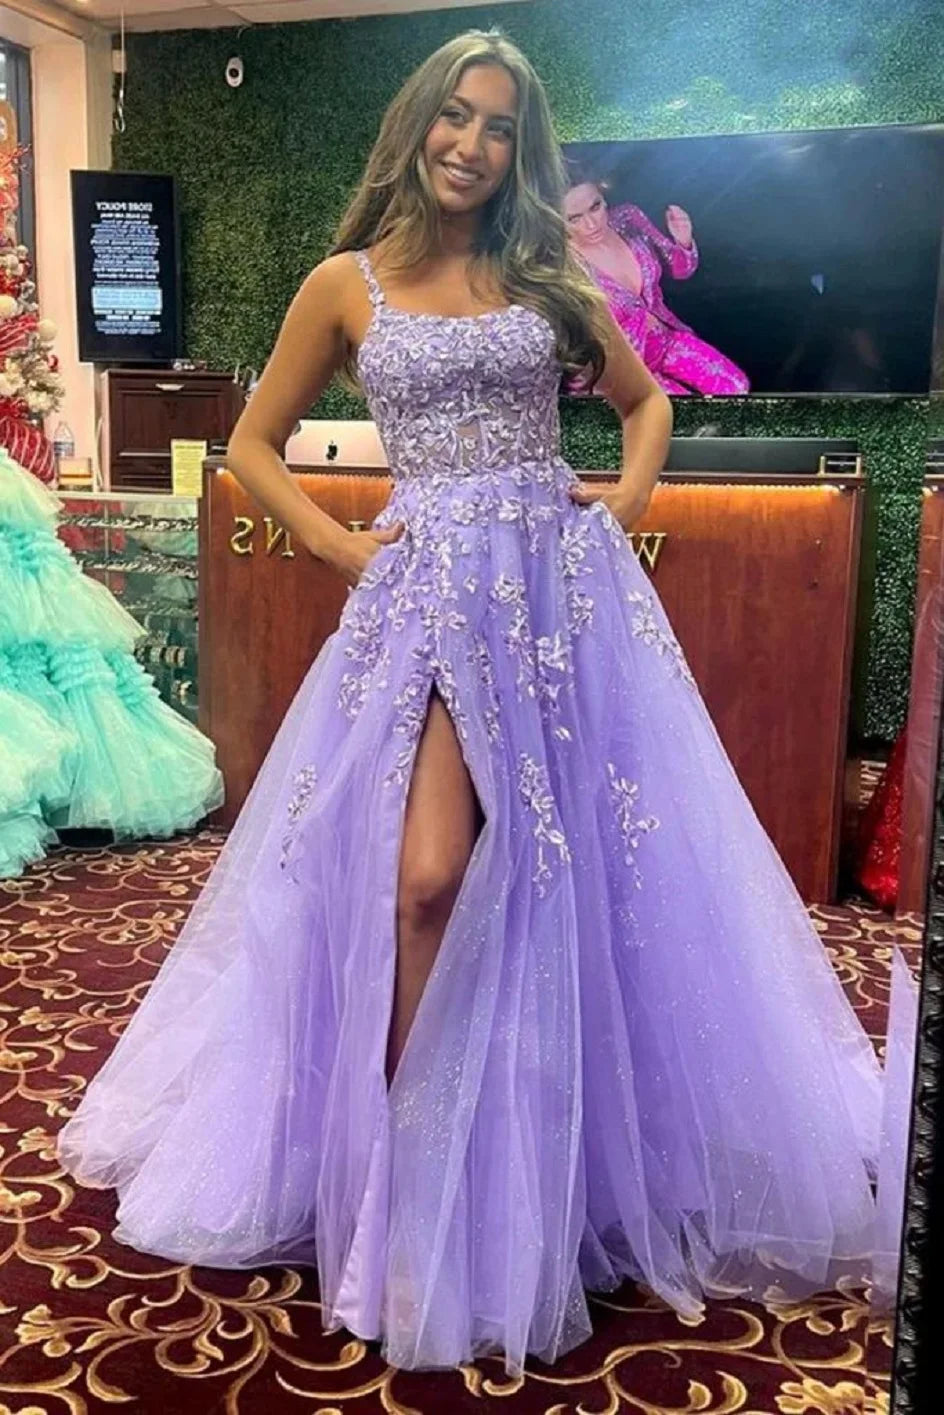 Shiny Lace Long Prom Dress with High Slit Appliques Purple Wedding Dresses Fiesta Backless A-line Women Evening Gowns